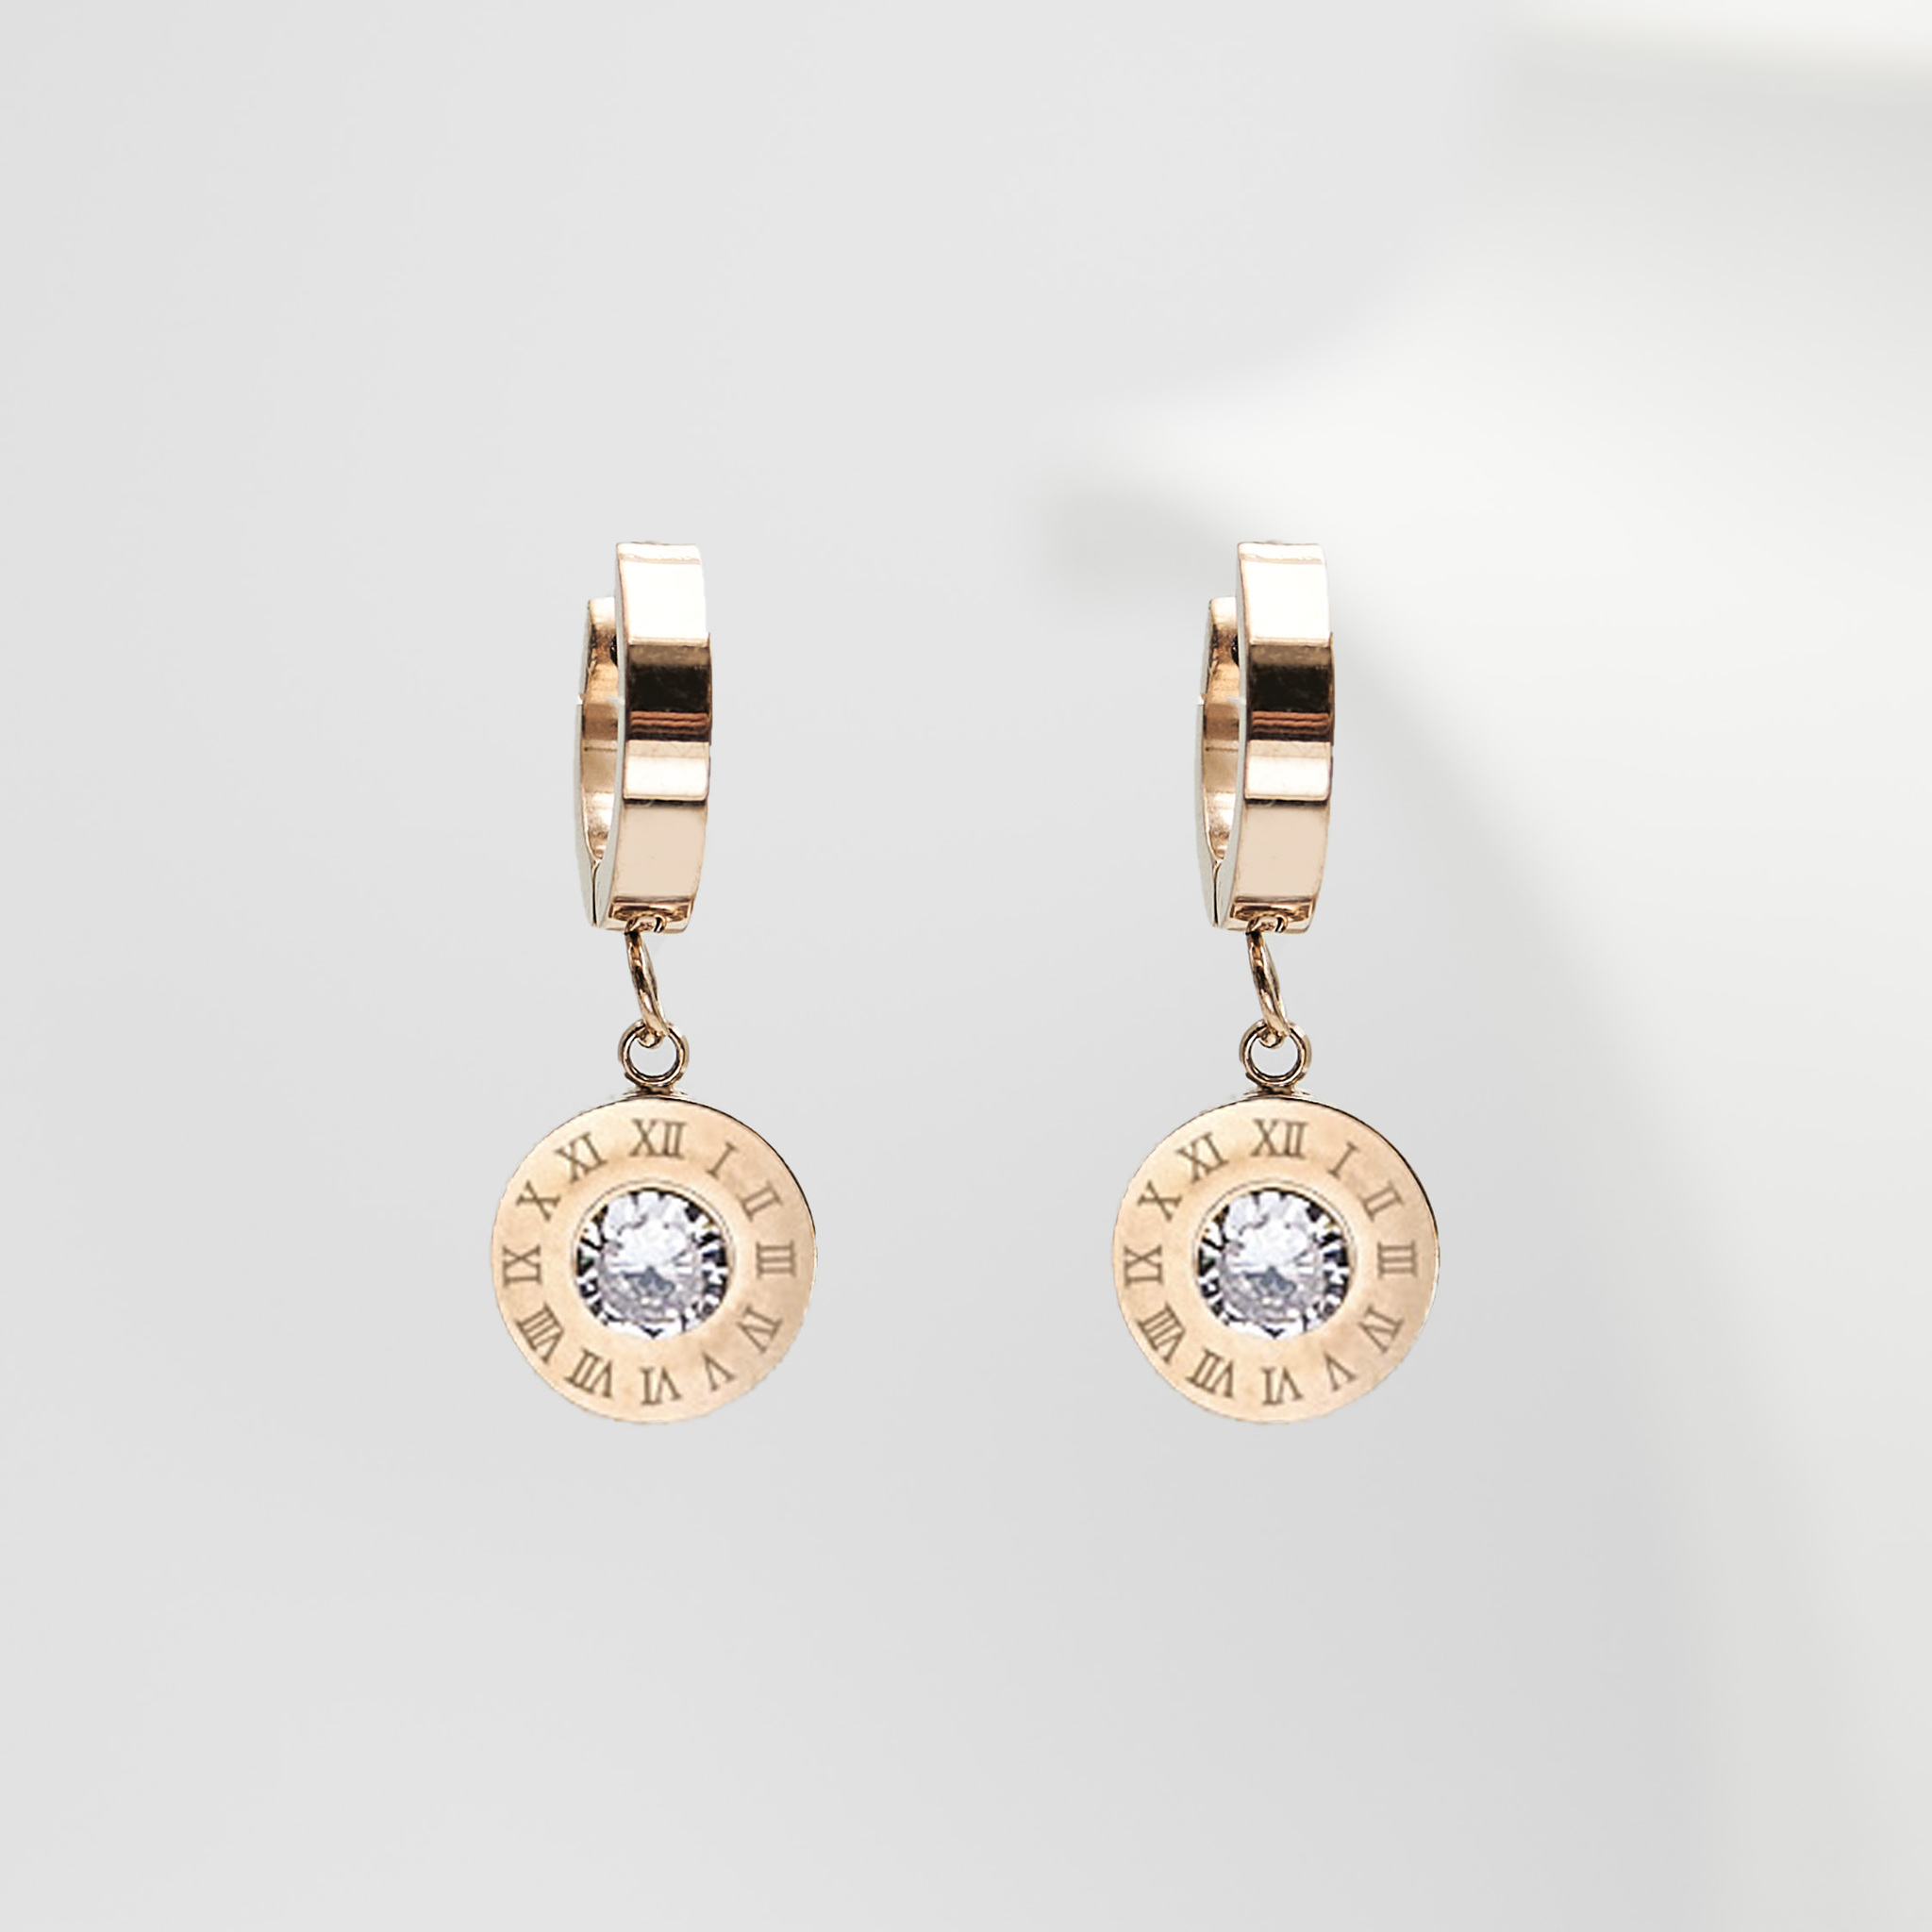 1- Queen Earrings Diamonds Rose Gold Edition- Örhänge 316L - Special Earrings From SWEVALI